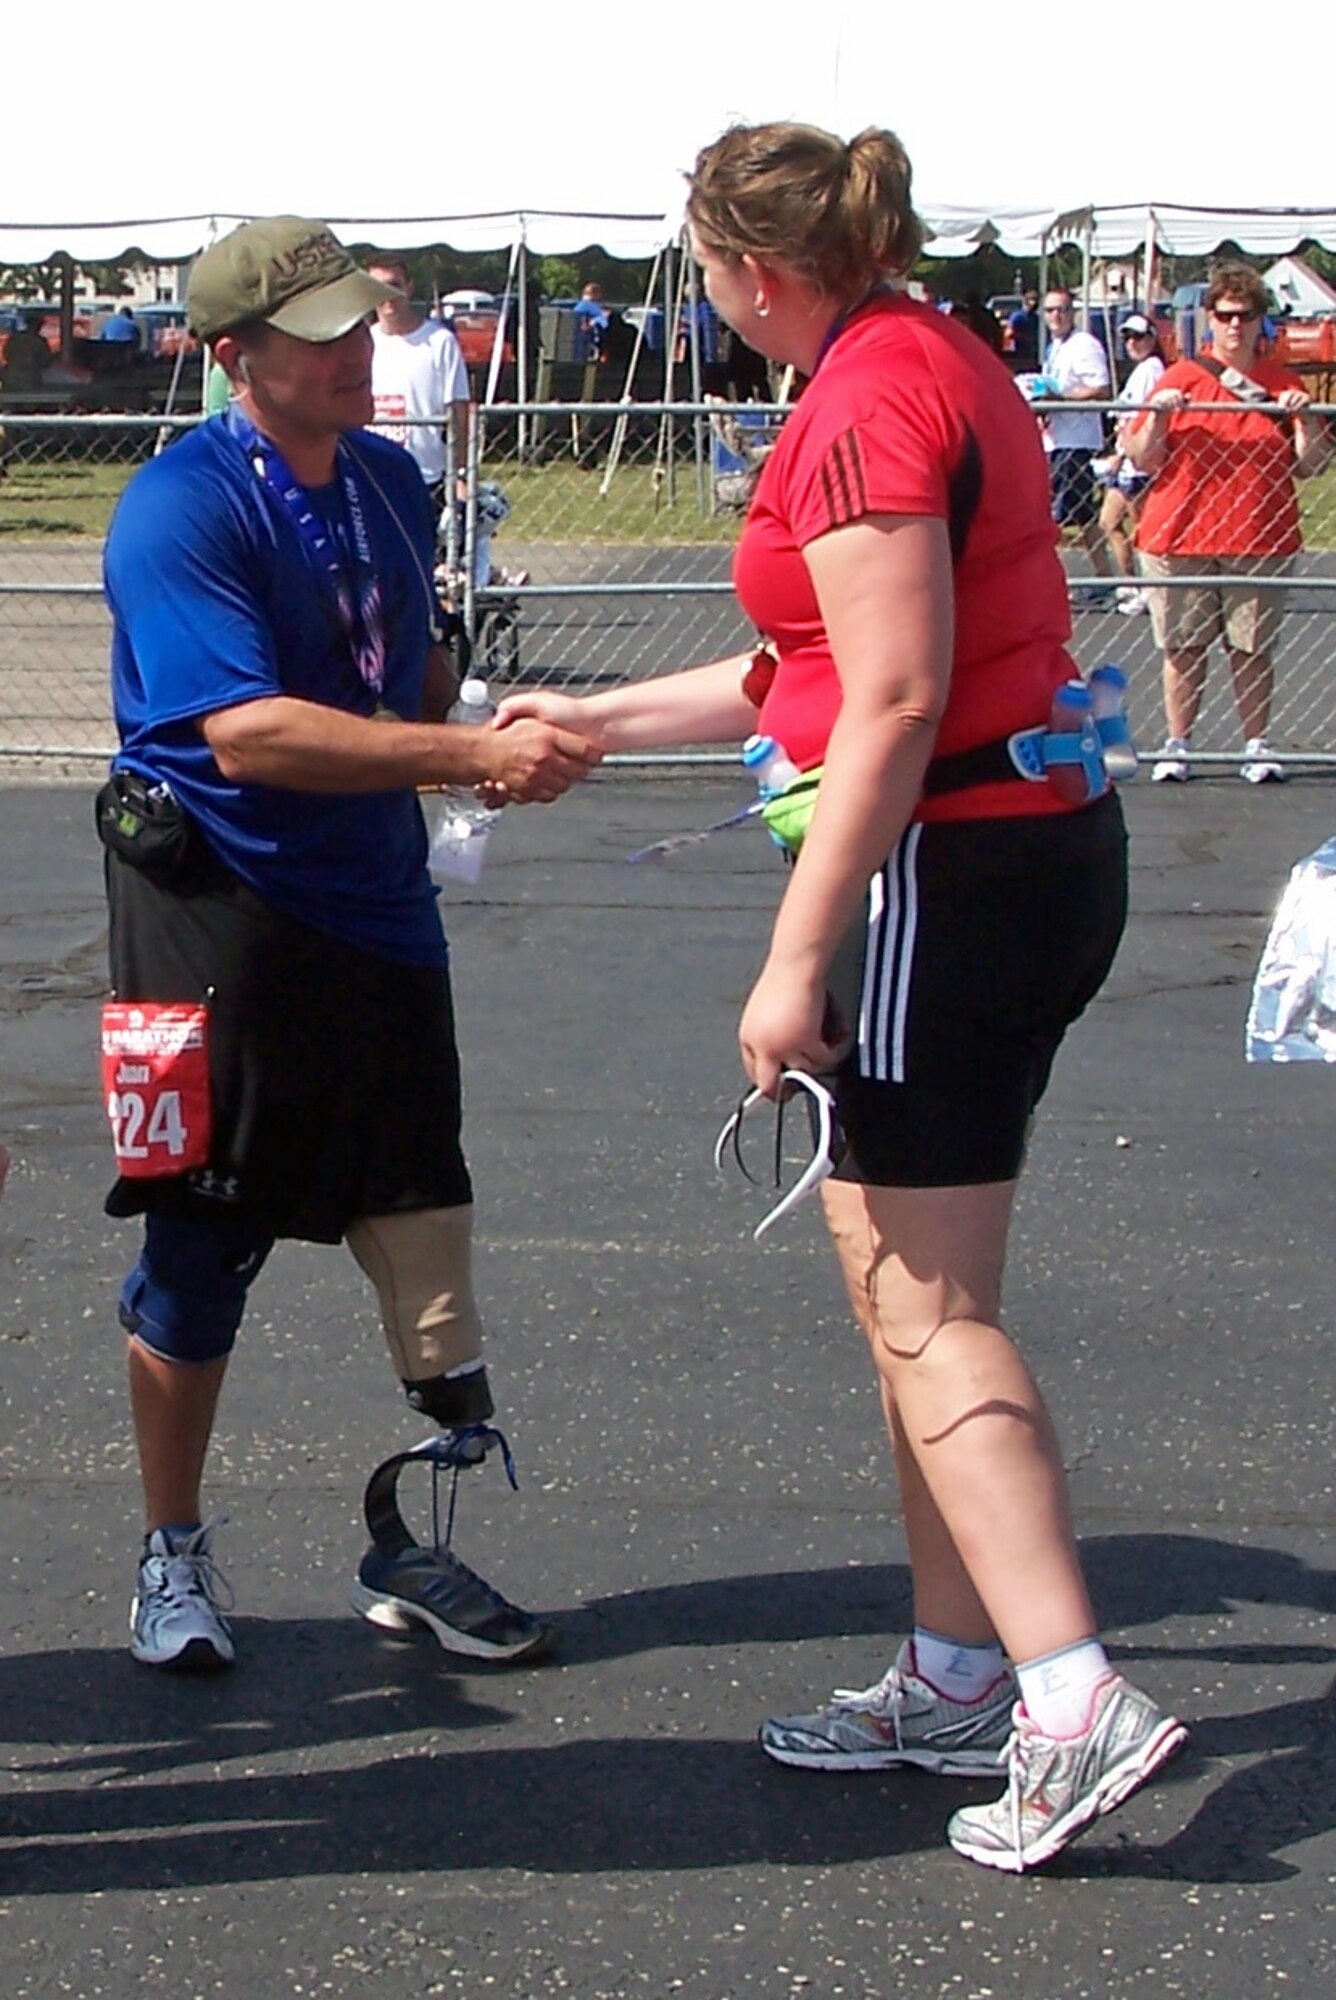 Col. Juan Alvarez is congratulated by a fellow runner after he completed the full marathon Sept. 19, 2009 at Wright-Patterson Air Force Base, Ohio.  The U.S. Air Force Marathon attracted nearly 10,000 runners.  Col. Alvarez lost his left leg in 1996 when the MH-53 he was flying crashed during a special operations counter-narcotics mission over central America.  Col. Alvarez is now the U.S. air attaché to Bolivia. (Air Force photo/Ted Theopolos)